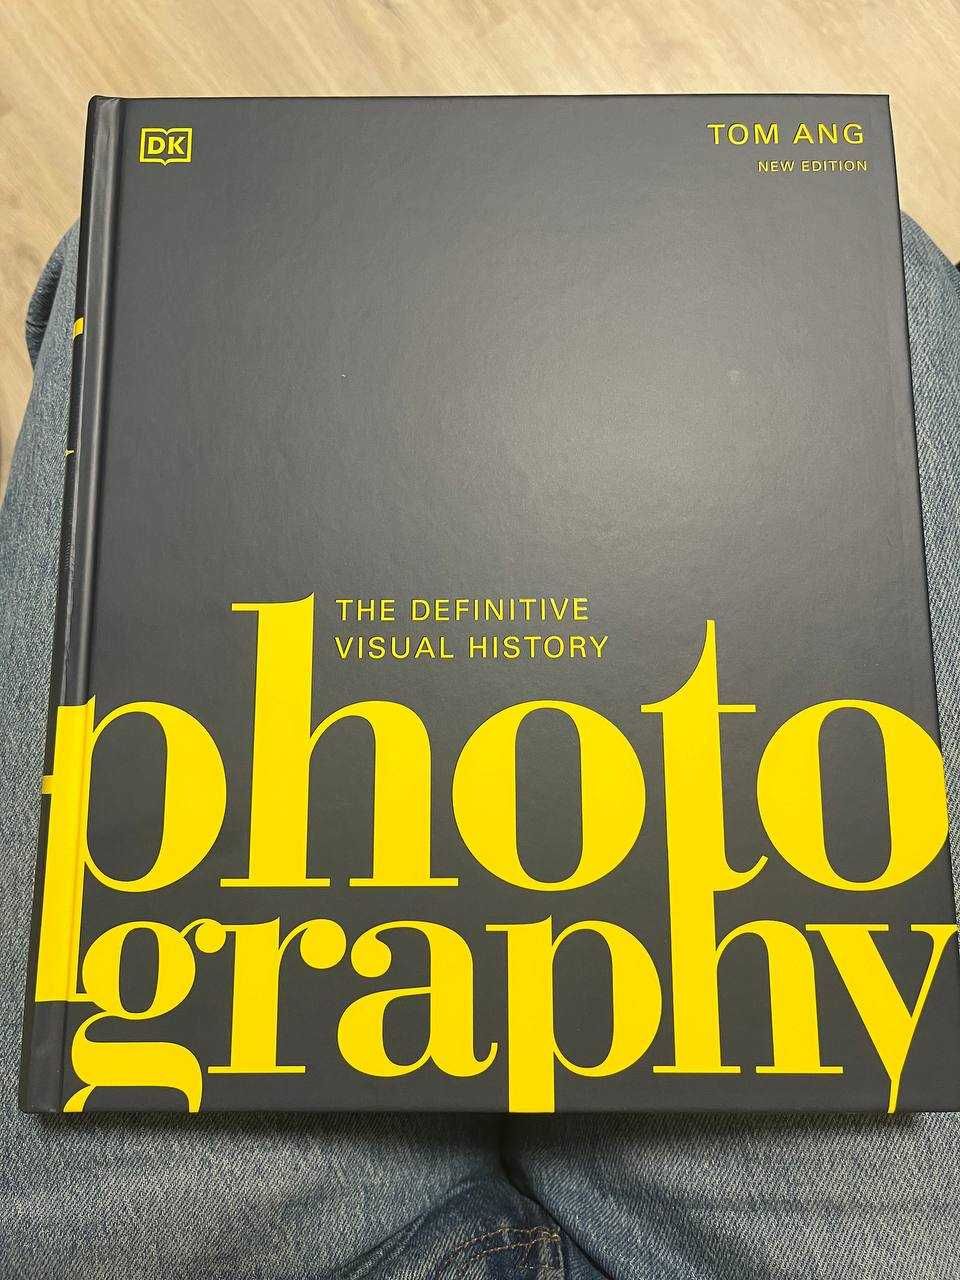 The definitive visual history of photography